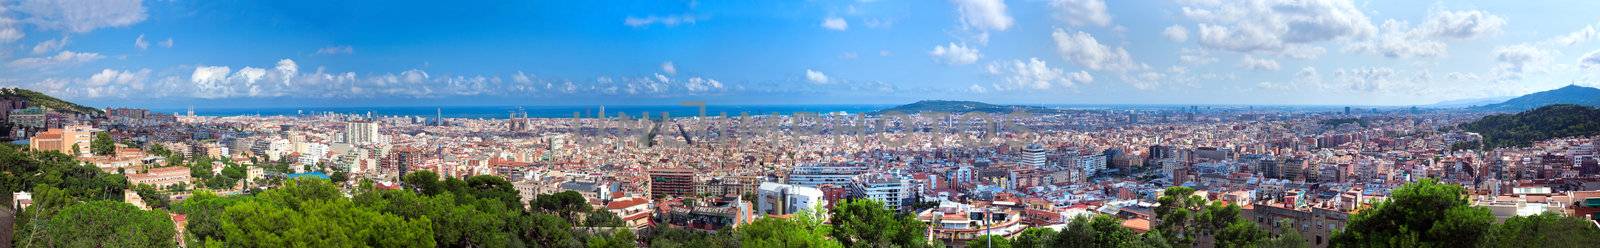 Barcelona, Spain at summer. Very wide, high quality panorama